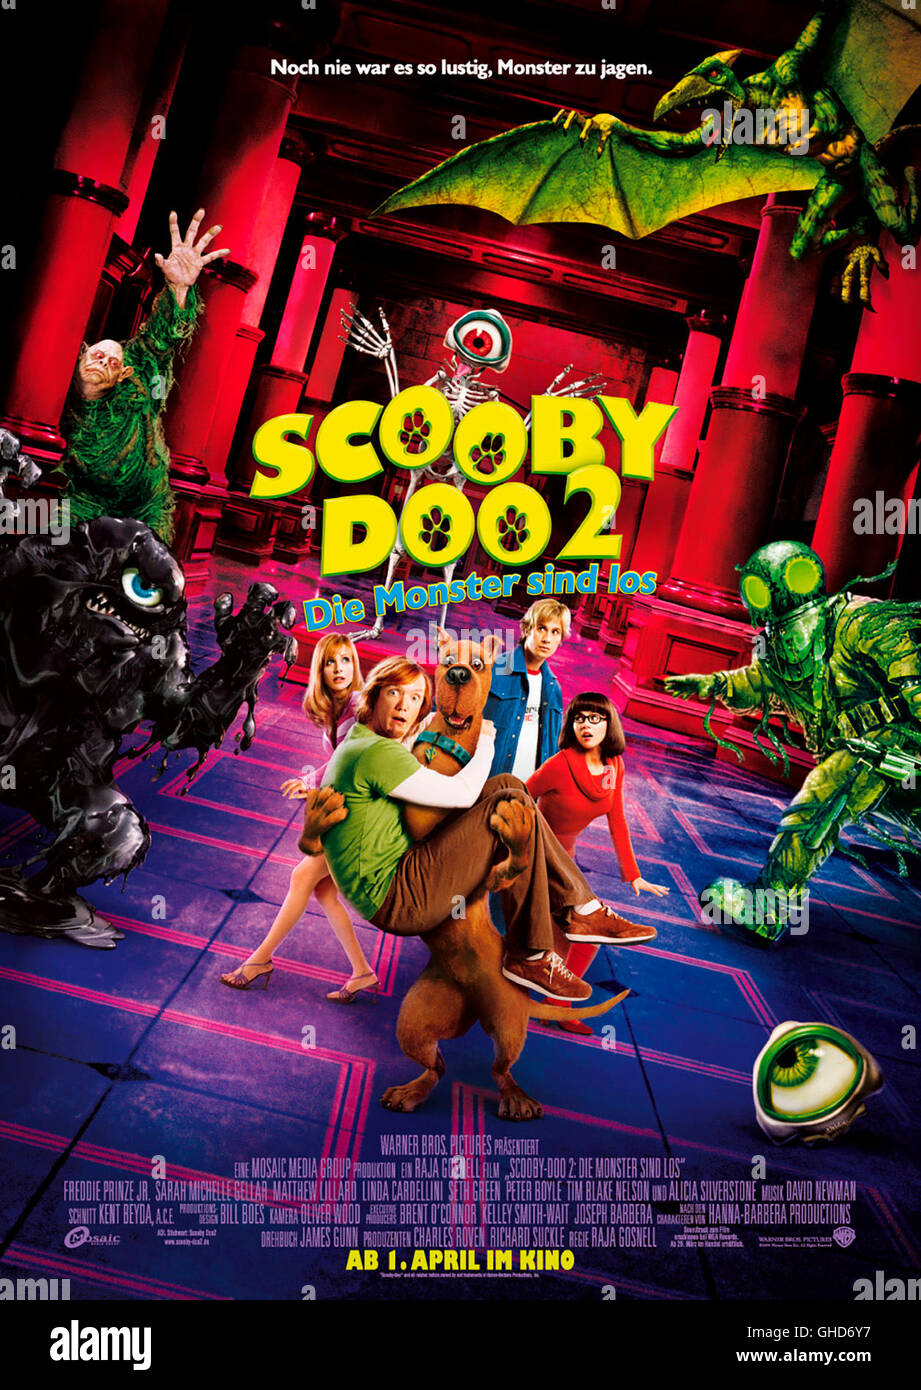 scooby doo 2 monsters unleashed monsters